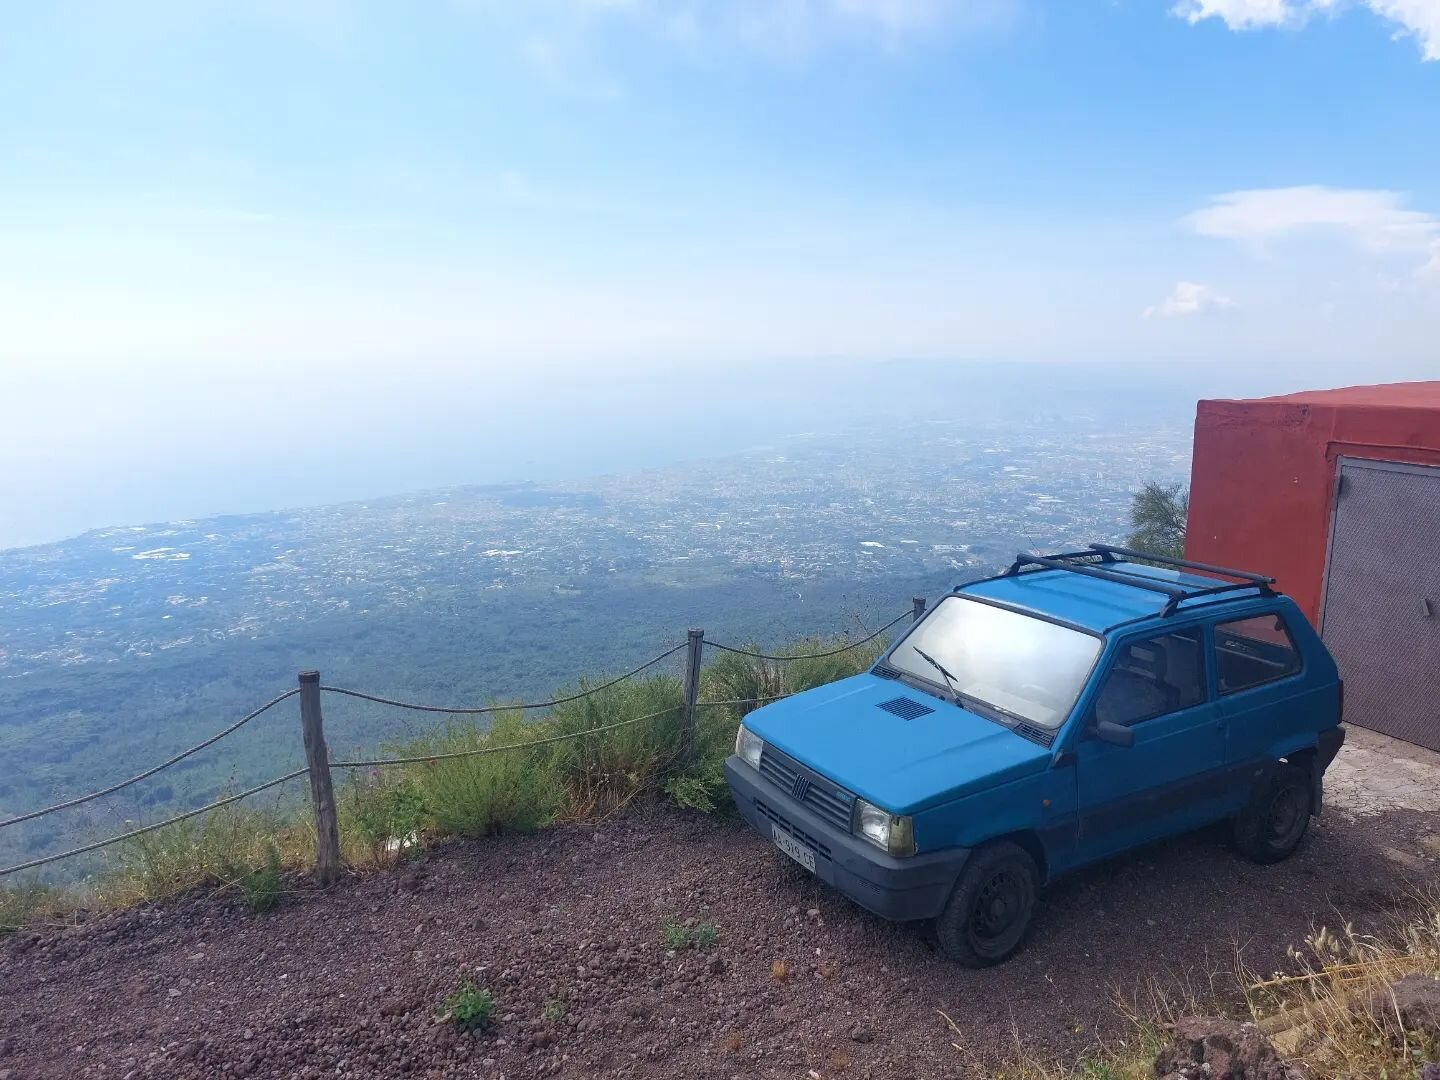 Italy did not disappoint for 80s Fiat Panda spotting. Even 2 at the top of Mt Vesuvius. I have a soft spot for them since my first ever car inherited from my brother was a 1989 Foat Panda 1000s (green and gold one in last pic).